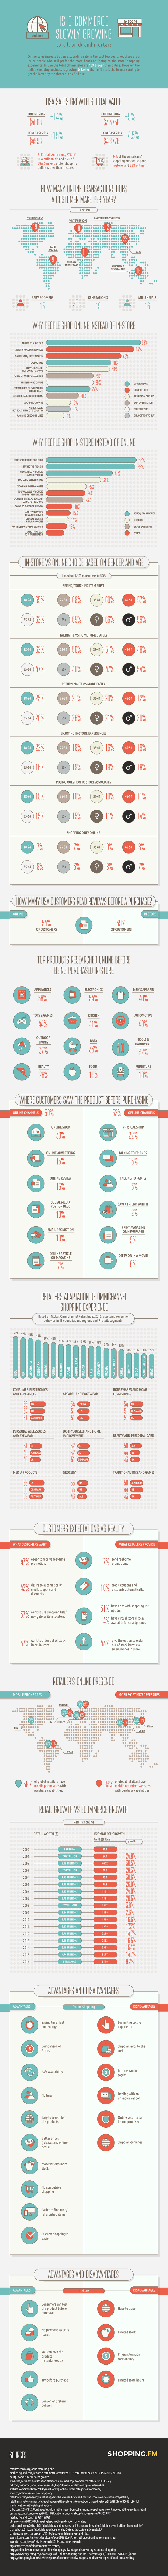 Online Shopping / e-Commerce Interesting Facts Infographic